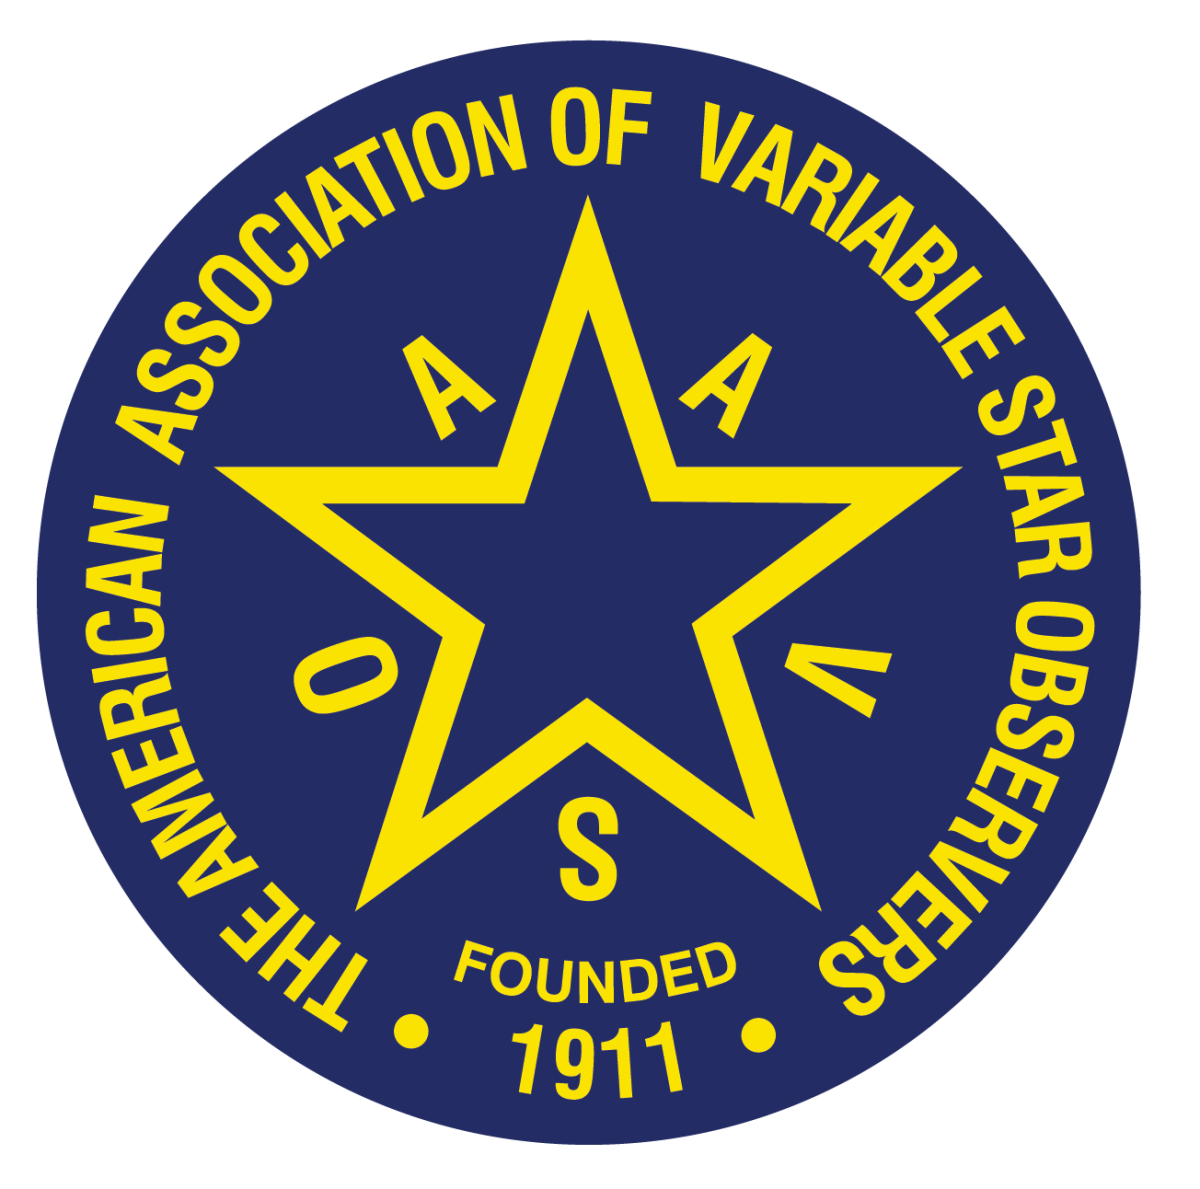 AAVSO seal of a star with A A V S O spaced out between the star points 